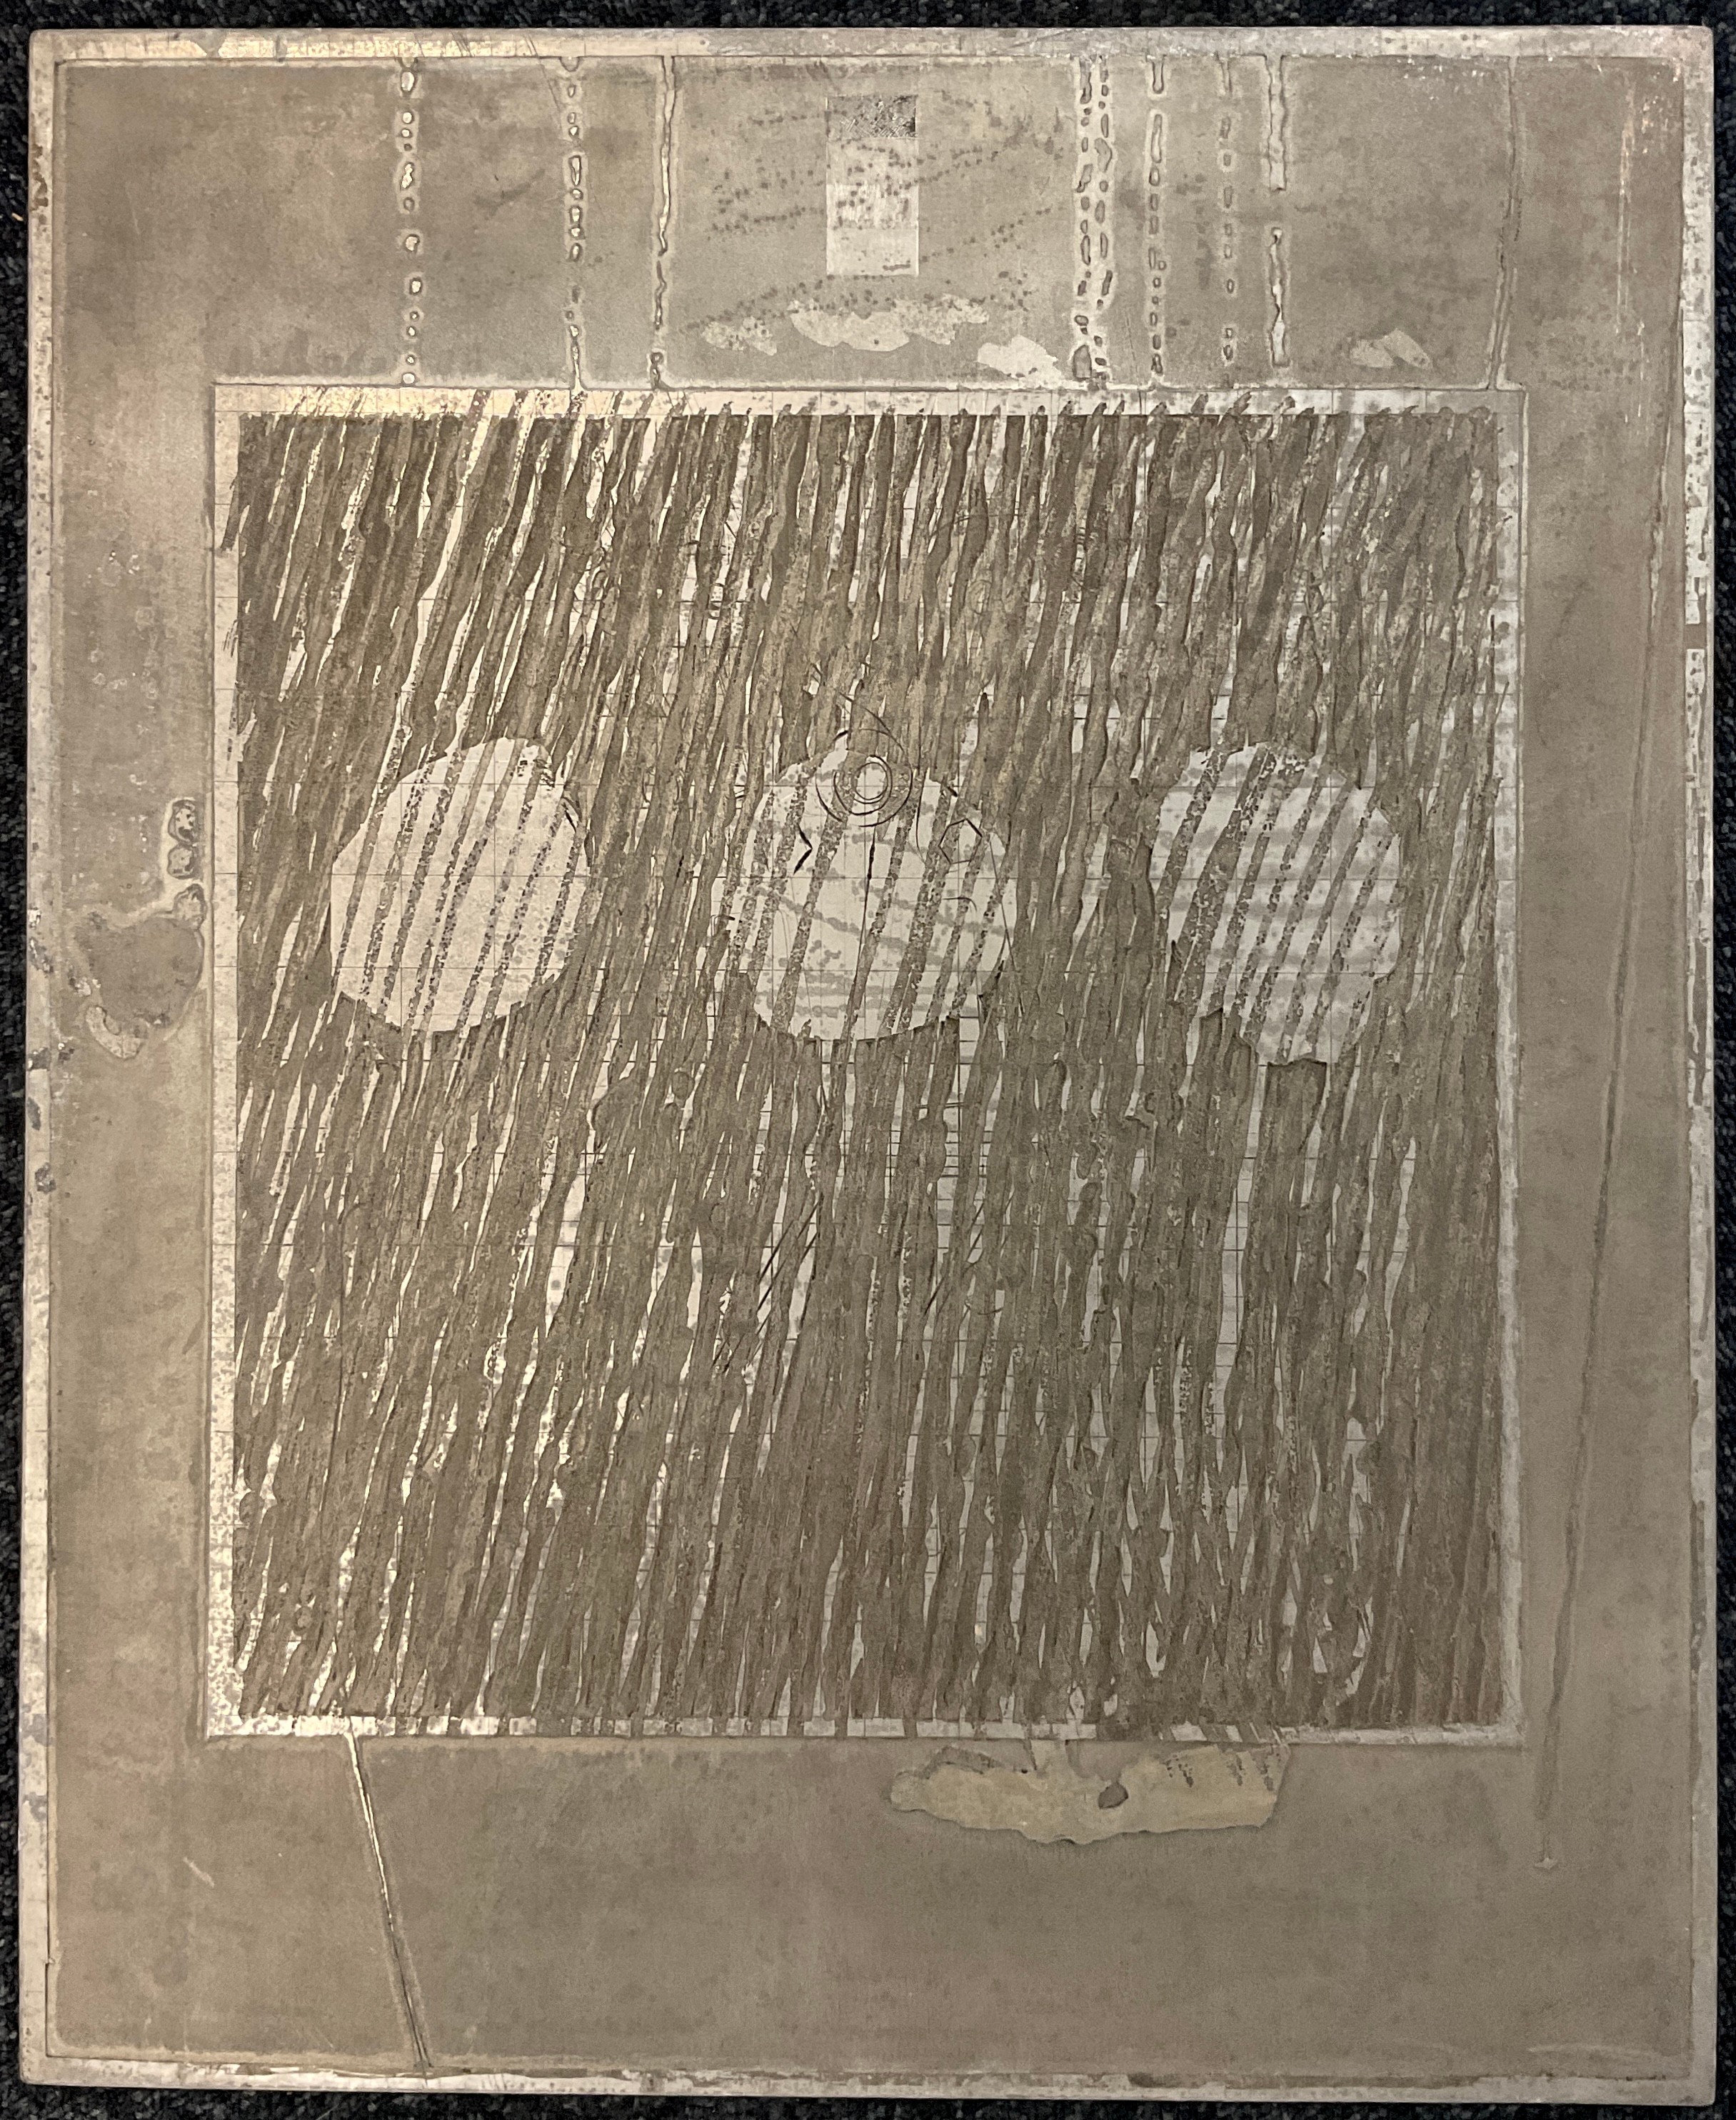 School of Anthony Currell, a metal printing plate, Abstract Composition, 56cm x 46cm.